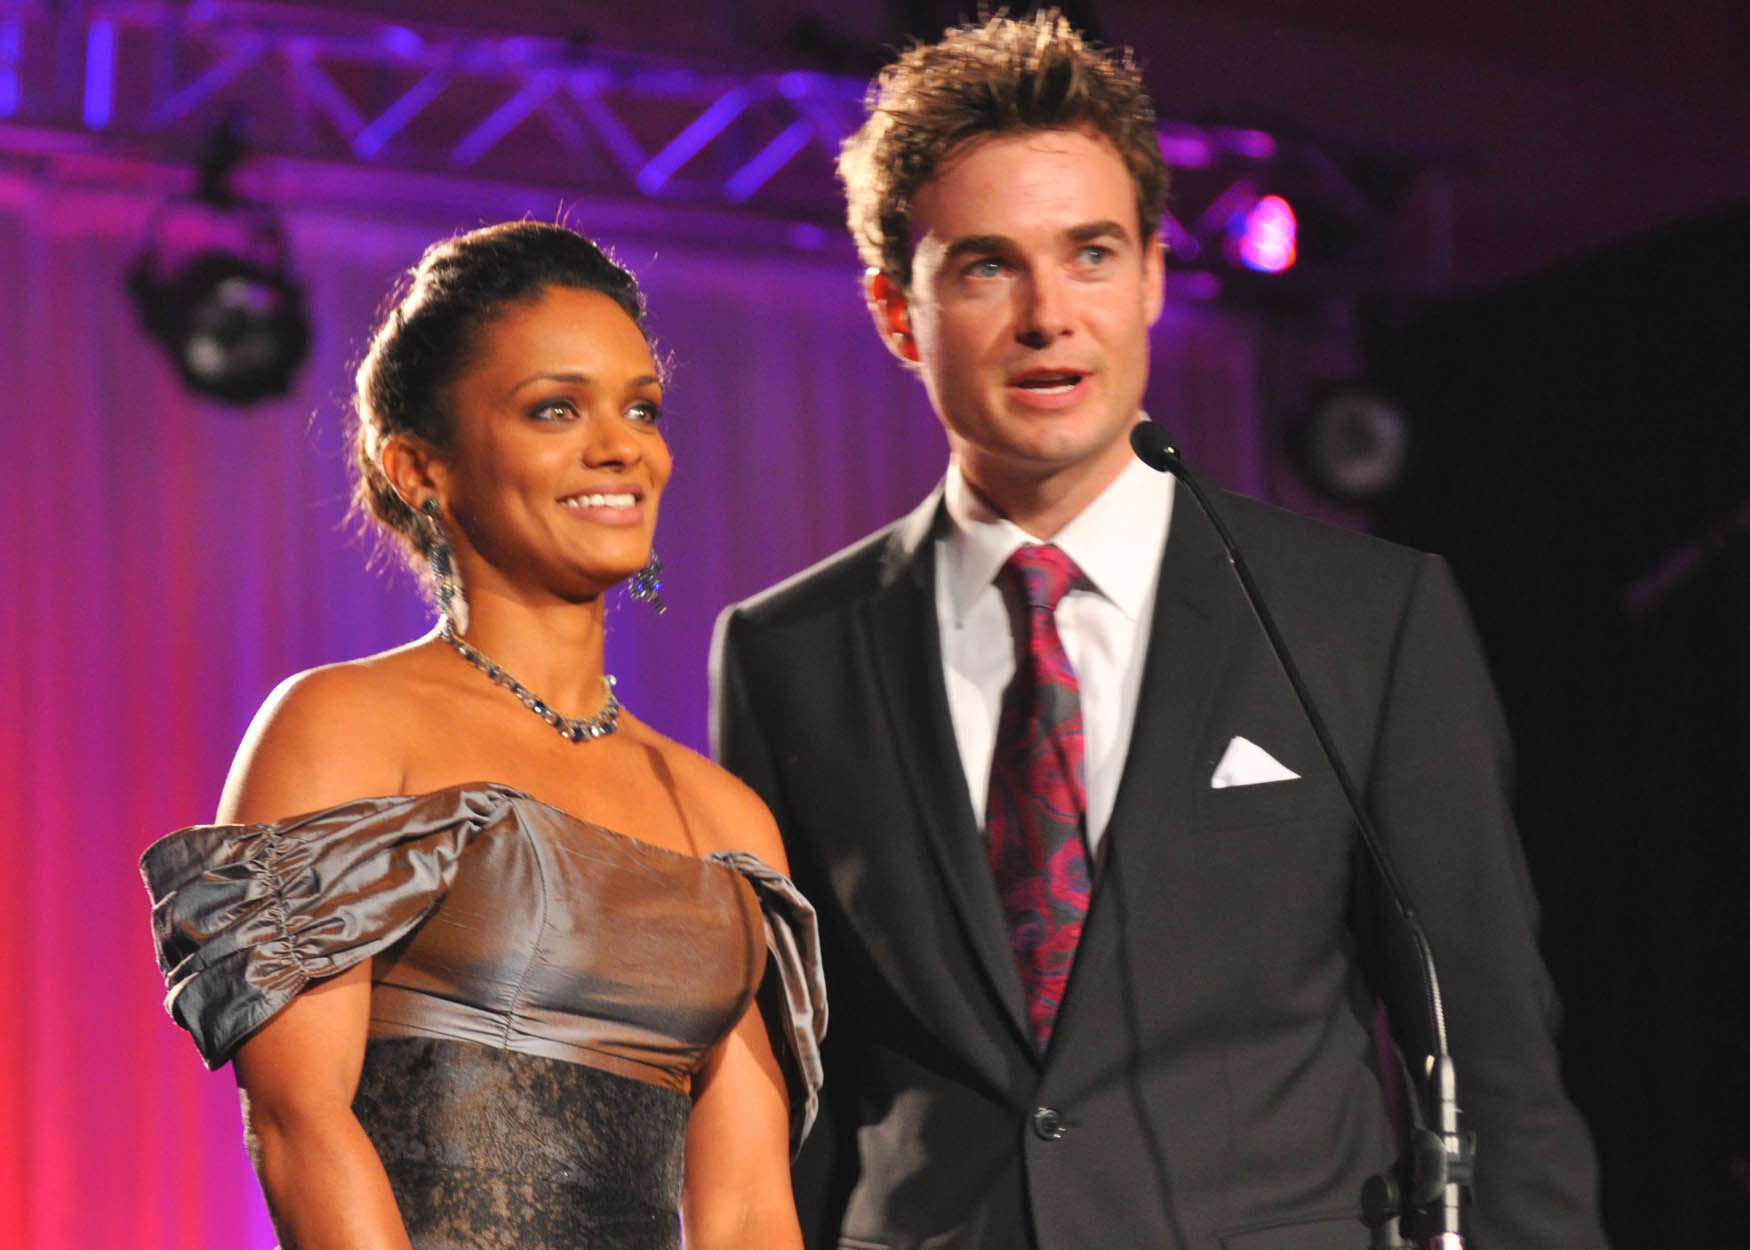 Kandyse McClure & Robin Dunne at the 2010 Leo Awards